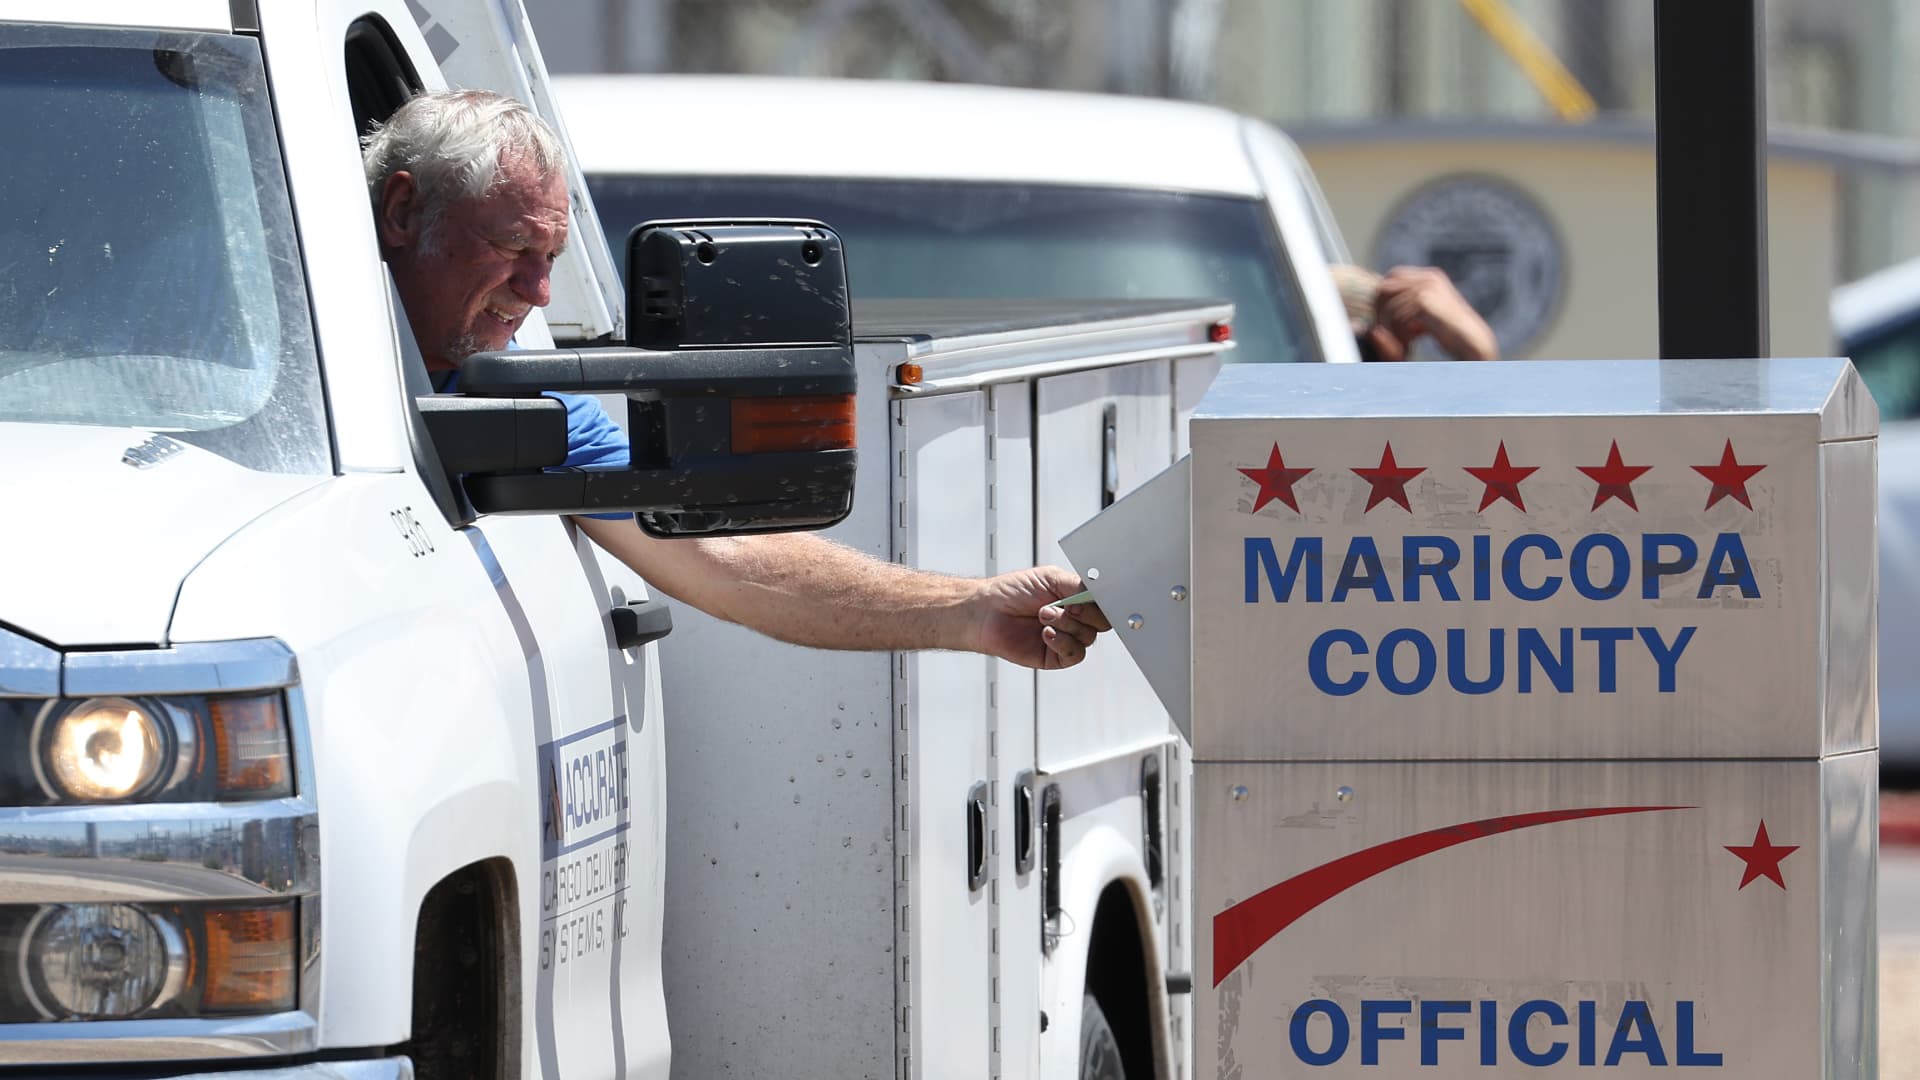 Election officials facing armed militia presence at some polls